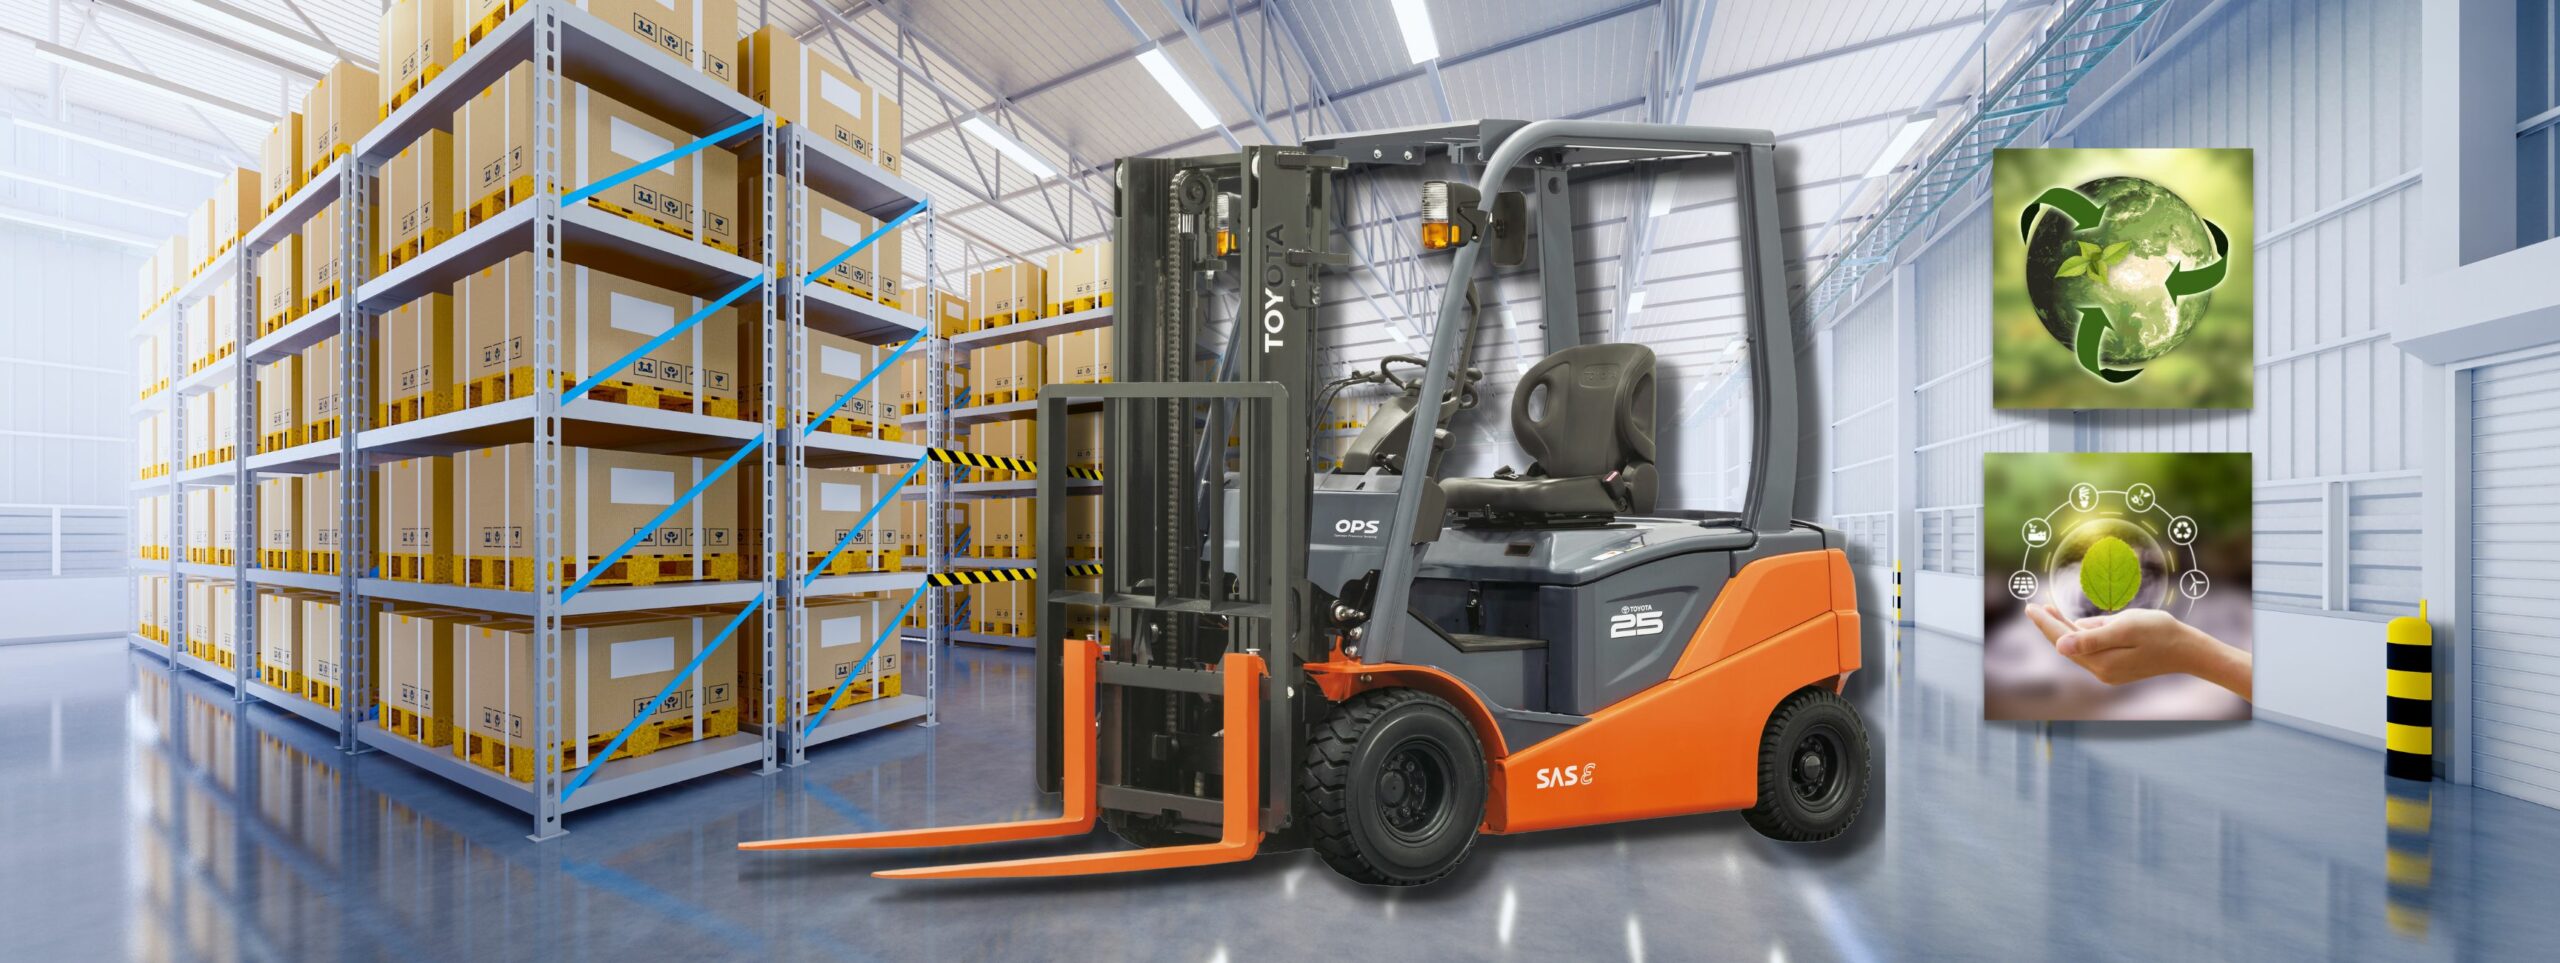 Toyota Electric Powered Forklift